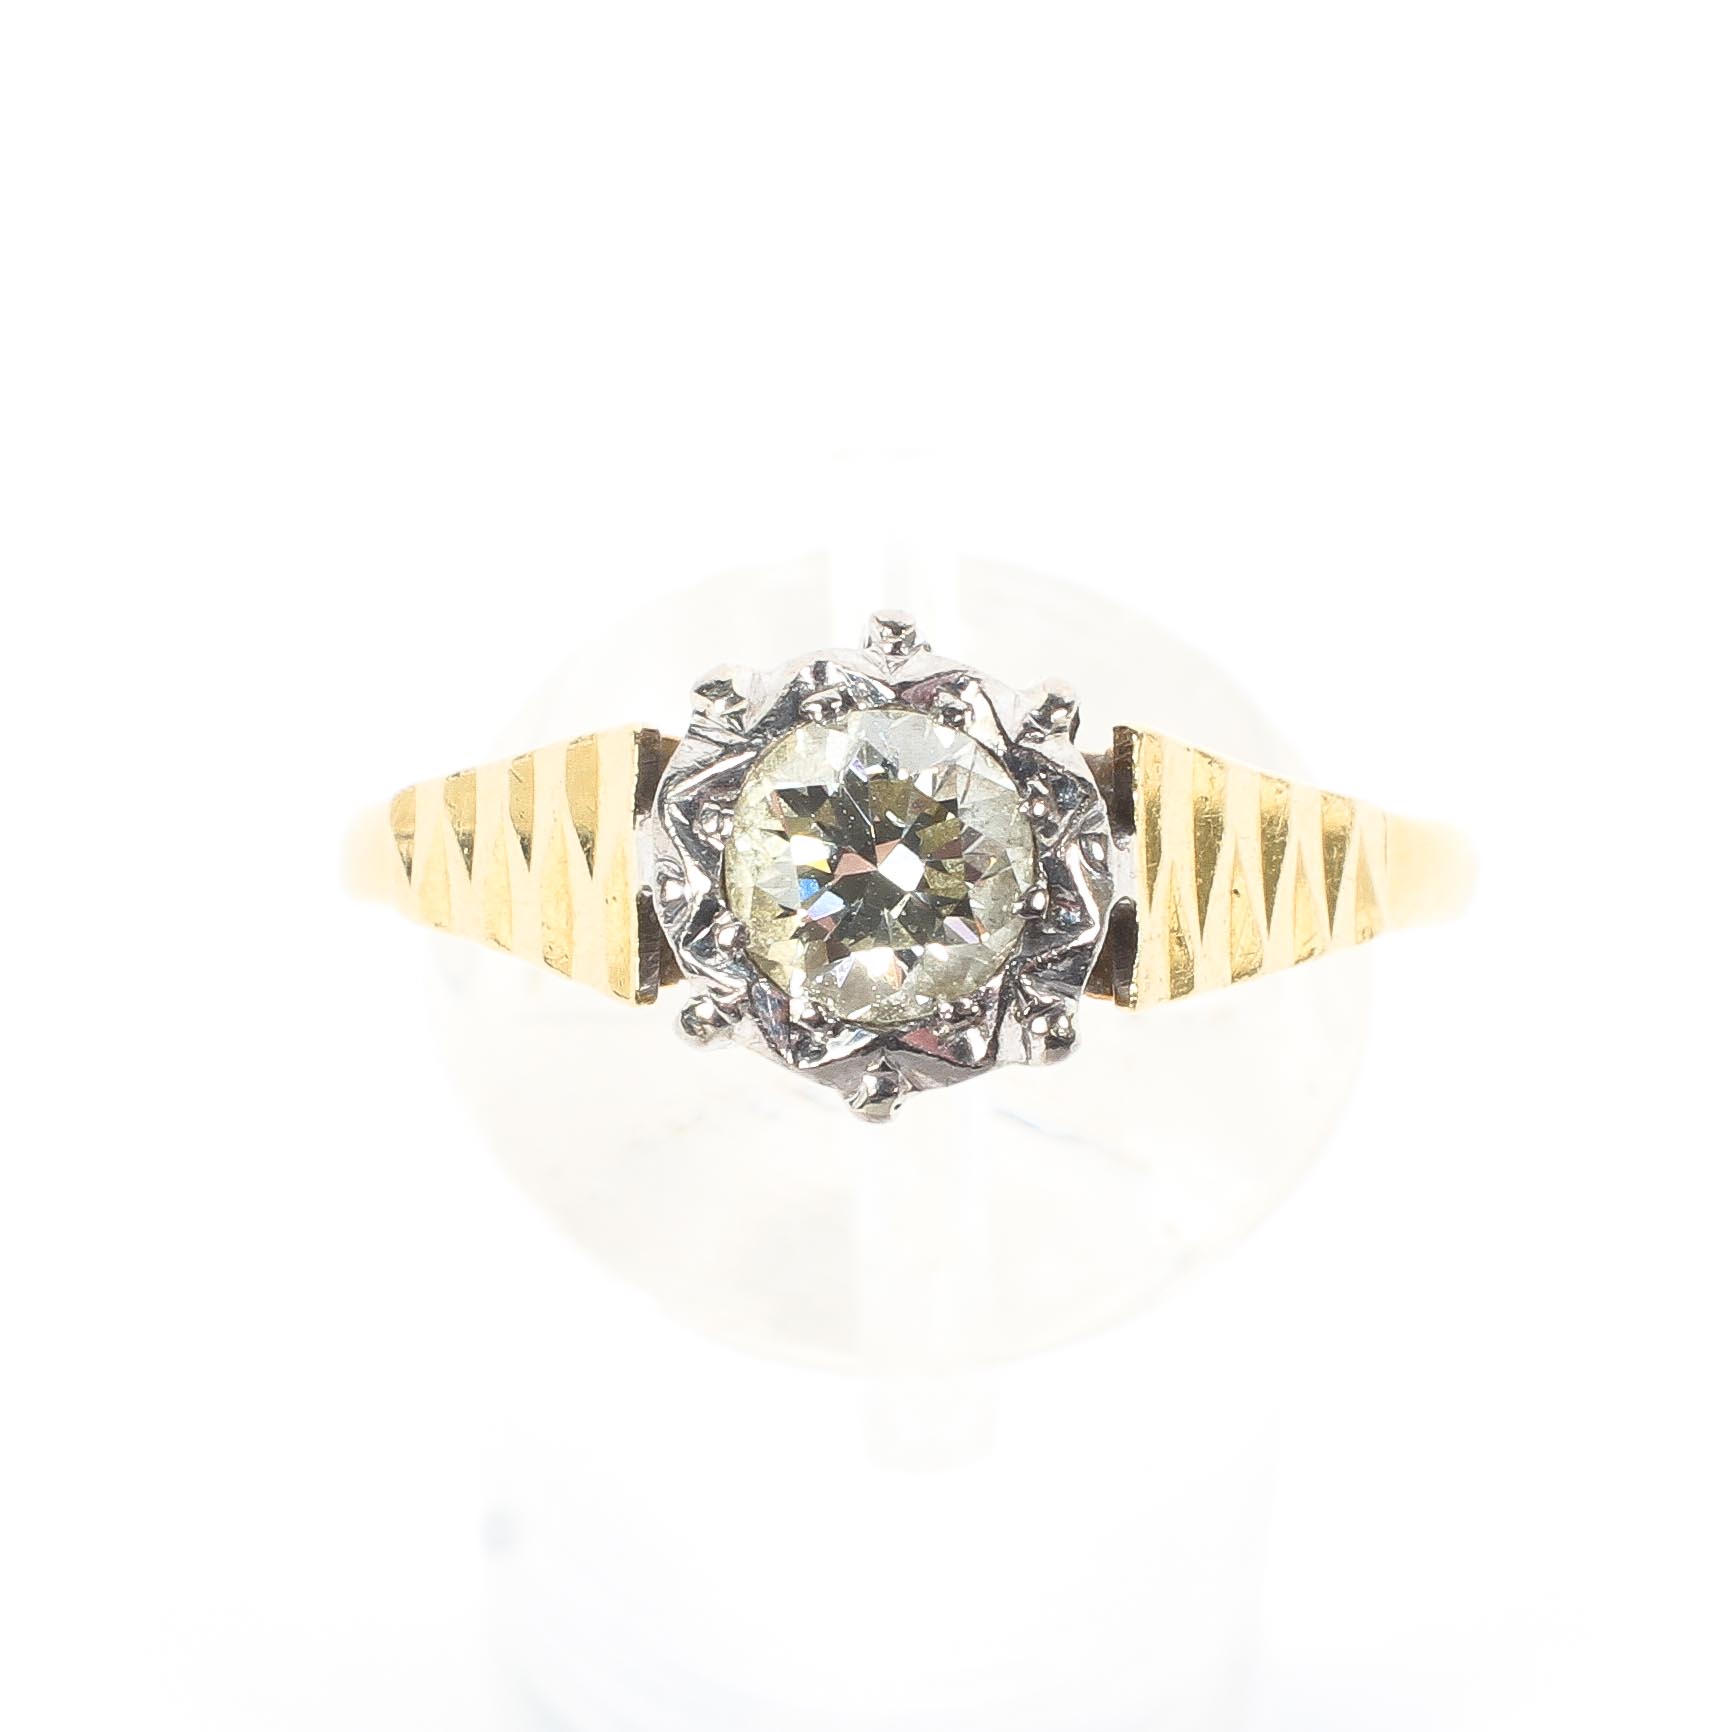 An 18ct yellow and white gold diamond solitaire ring, - Image 2 of 4